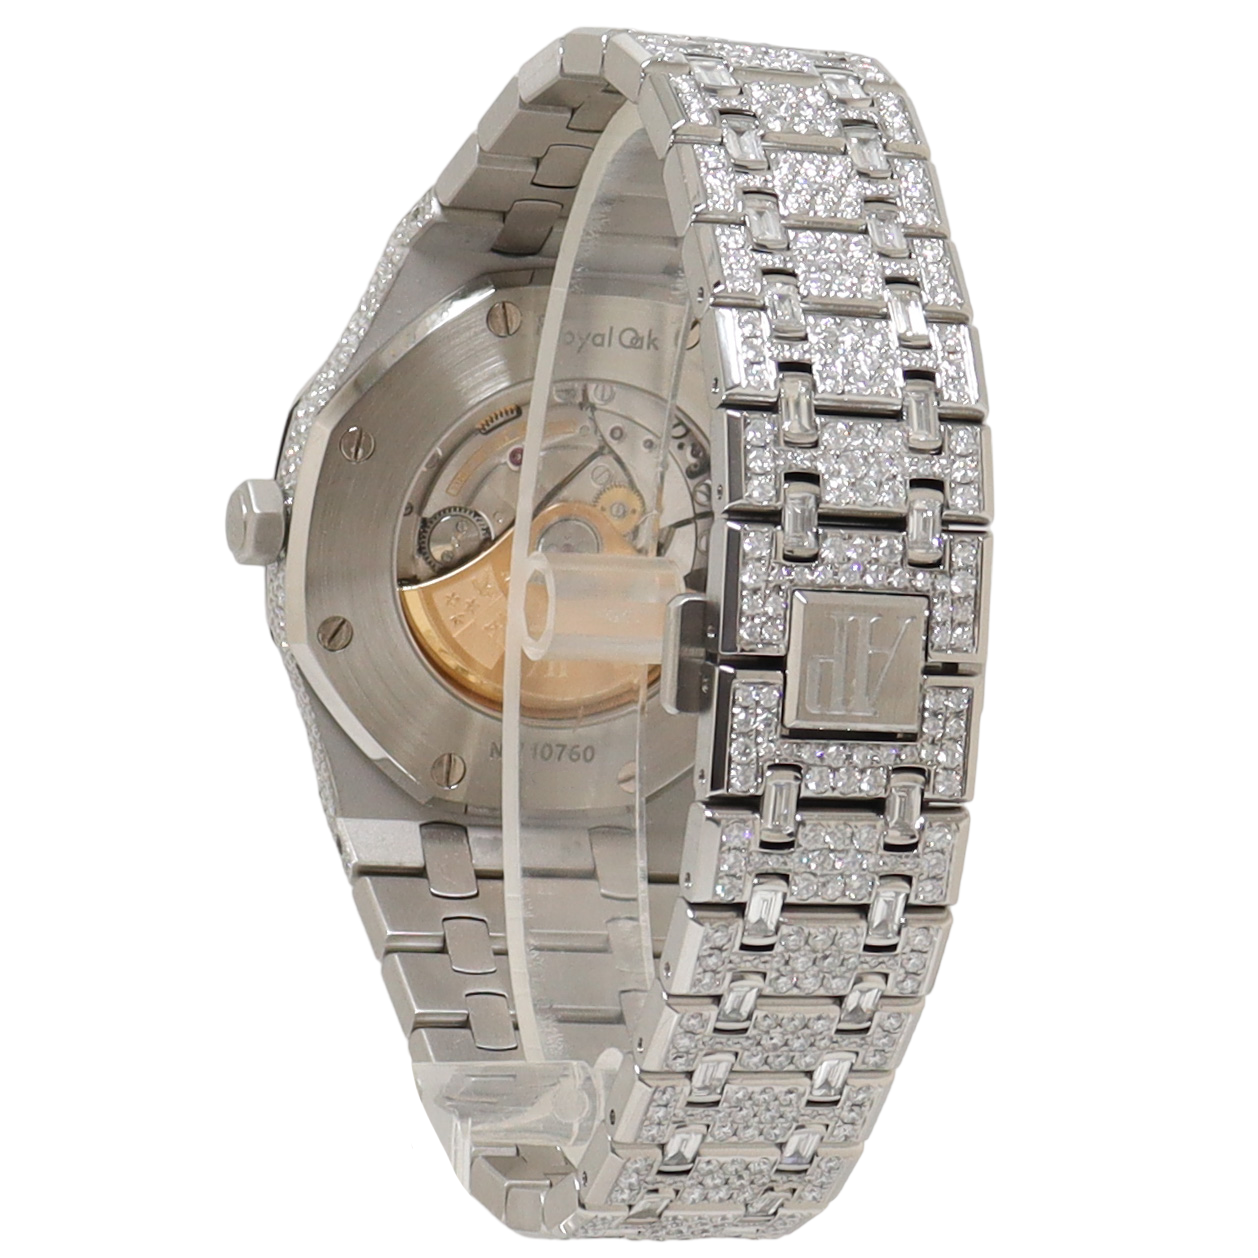 Audemars Piguet Royal Oak Stainless Steel 42mm Iced Out Pave Diamond Dial Watch Reference#: 26591TI.OO.1252TI.03 - Happy Jewelers Fine Jewelry Lifetime Warranty